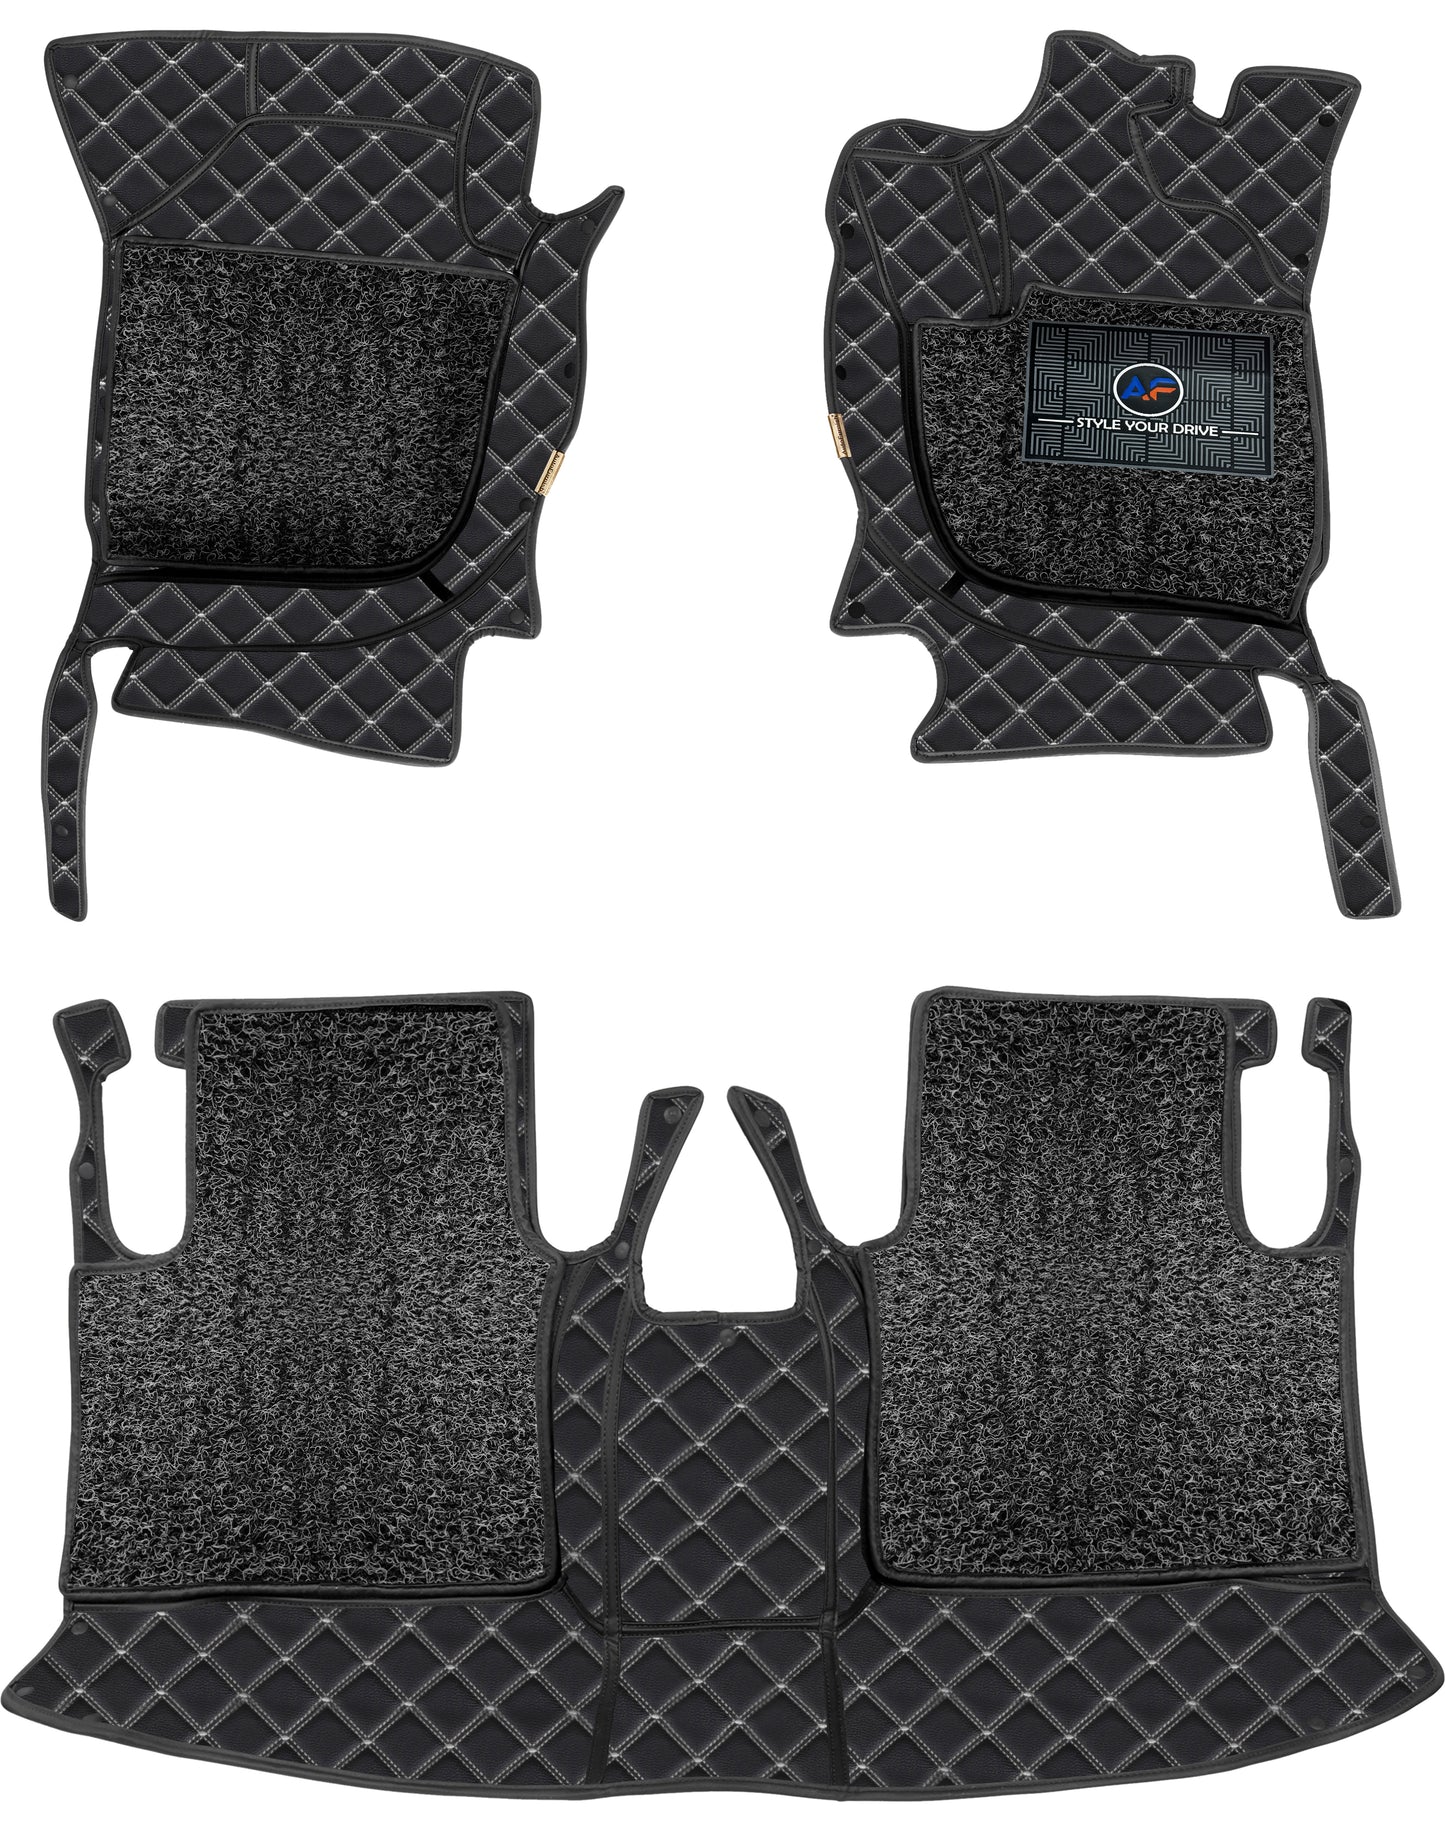 Mahindra Scorpio N (7 Seater) 2022-7D Luxury Car Mat, All Weather Proof, Anti-Skid, 100% Waterproof & Odorless with Unique Diamond Fish Design (24mm Luxury PU Leather, 2 Rows)